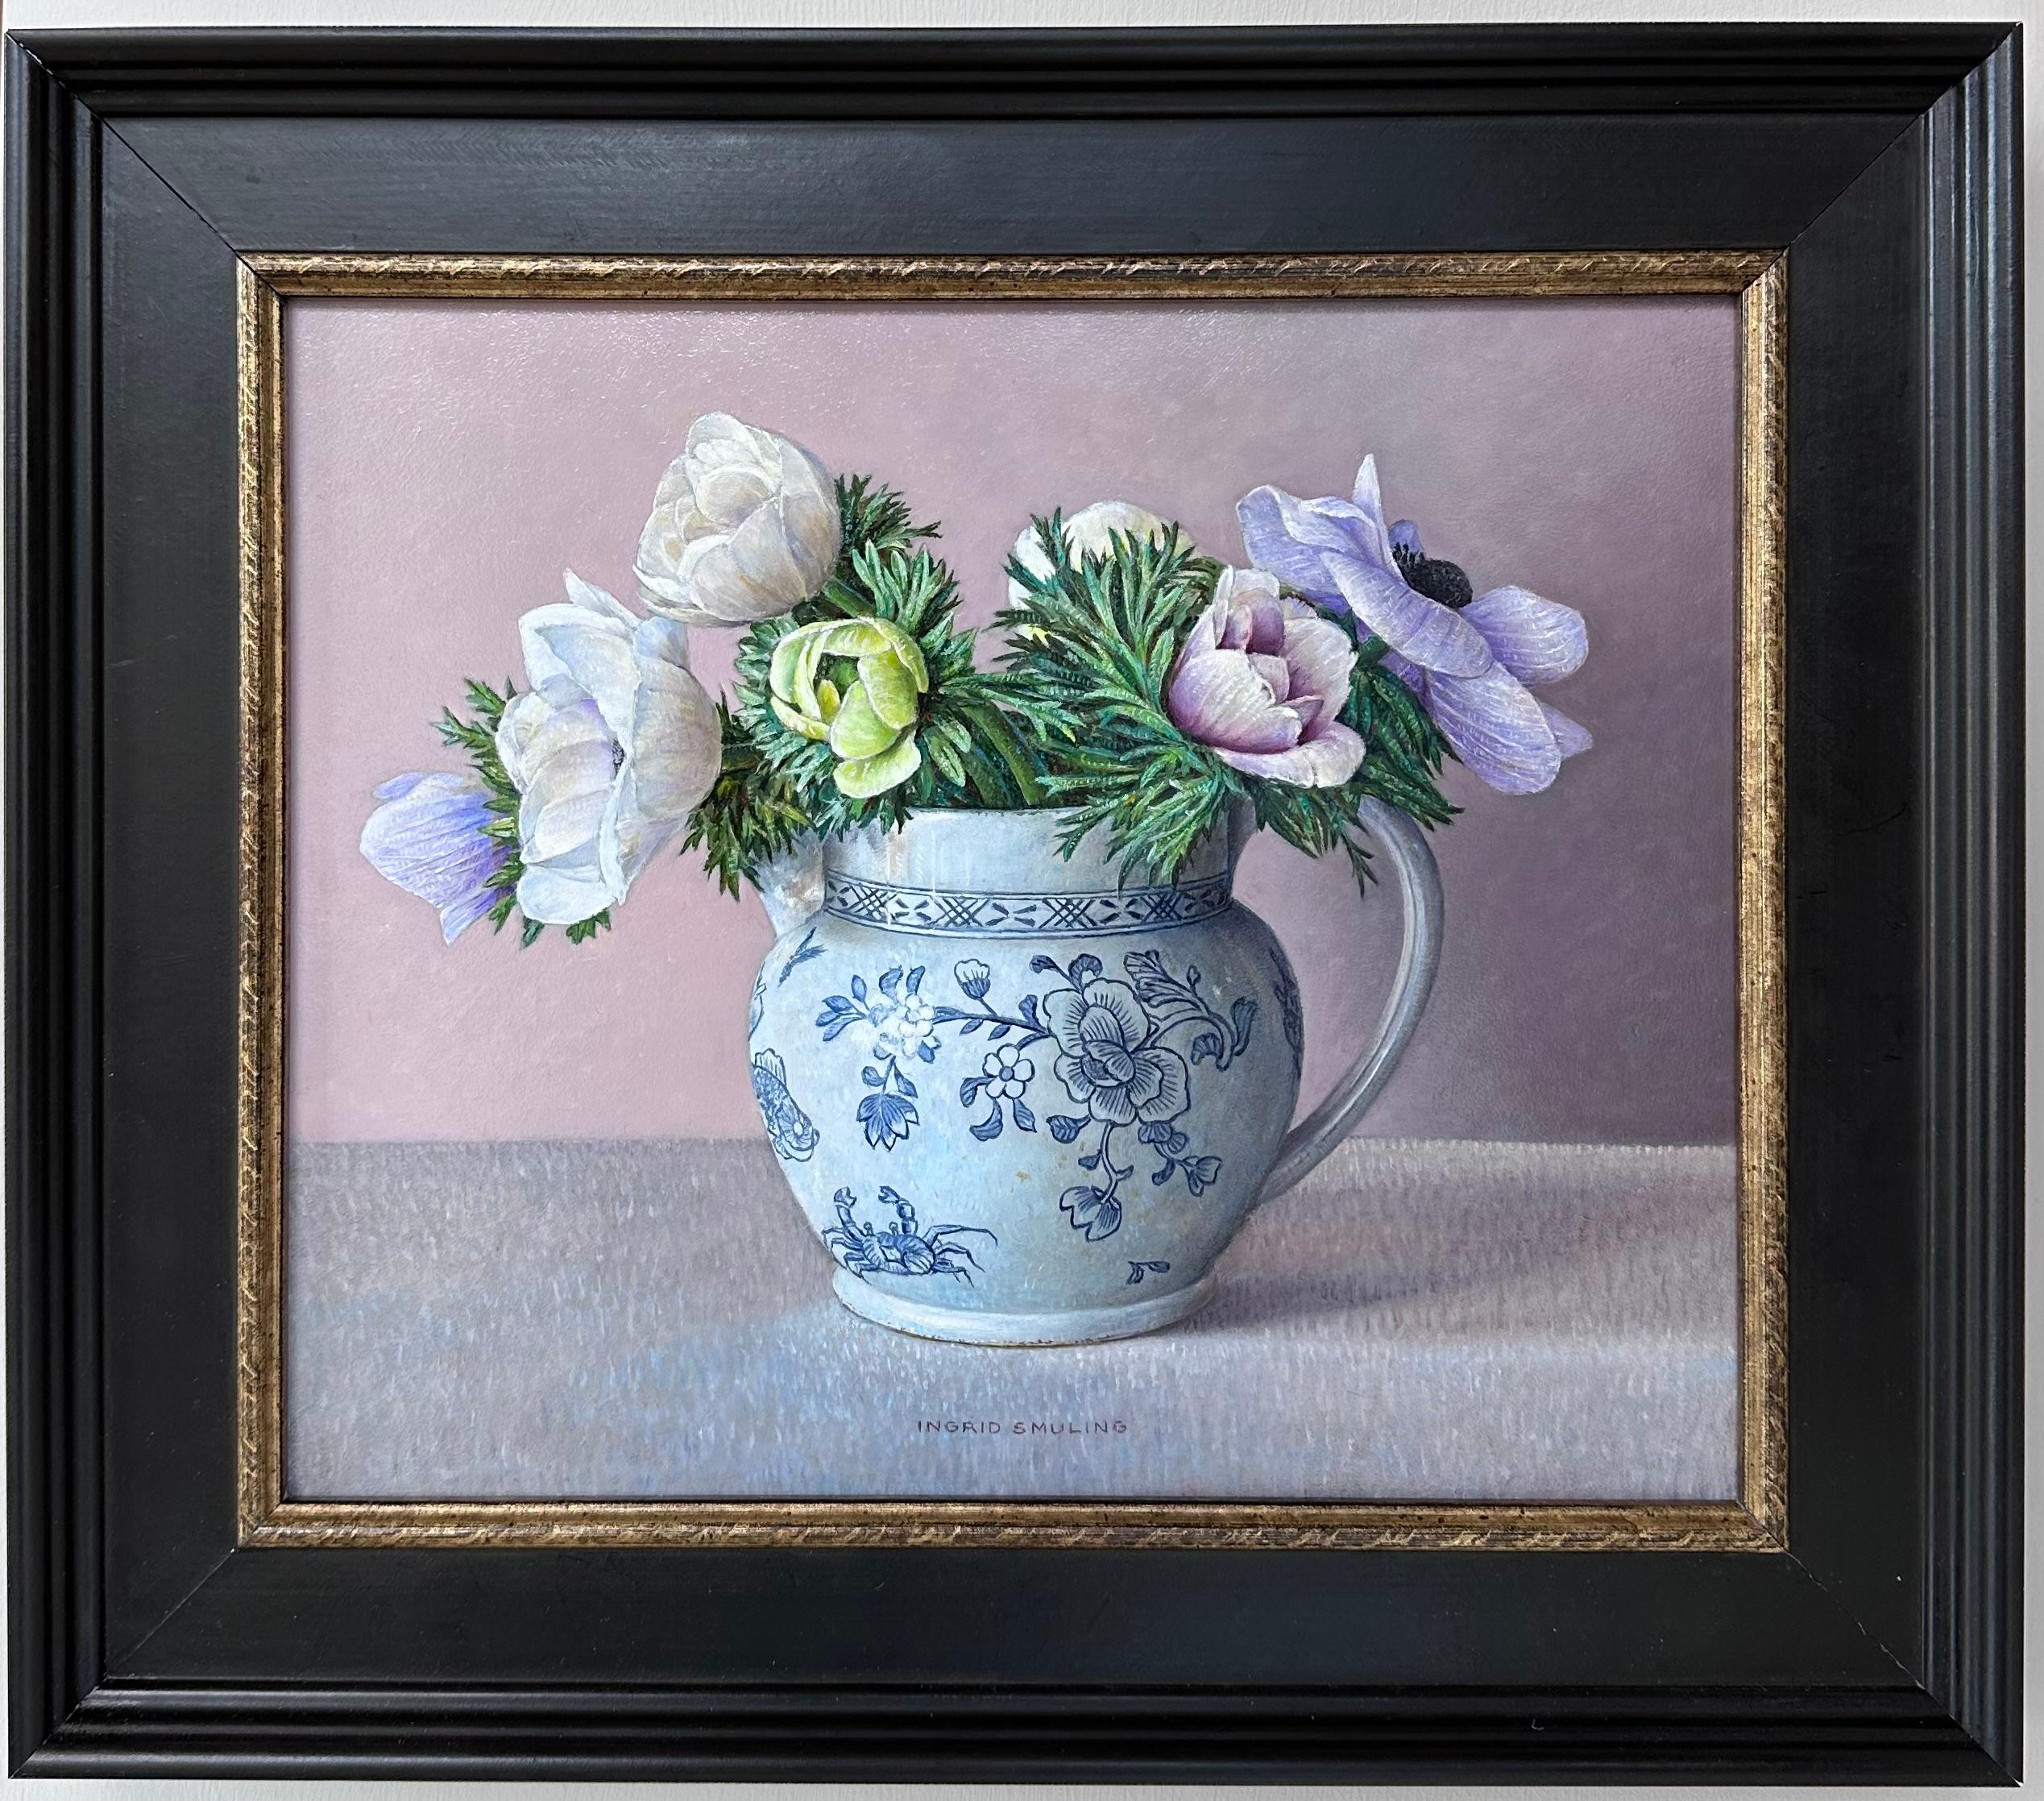 Wedgewood Eturia with Anemones- 21st Century Dutch Still-life painting  - Painting by Ingrid Smuling